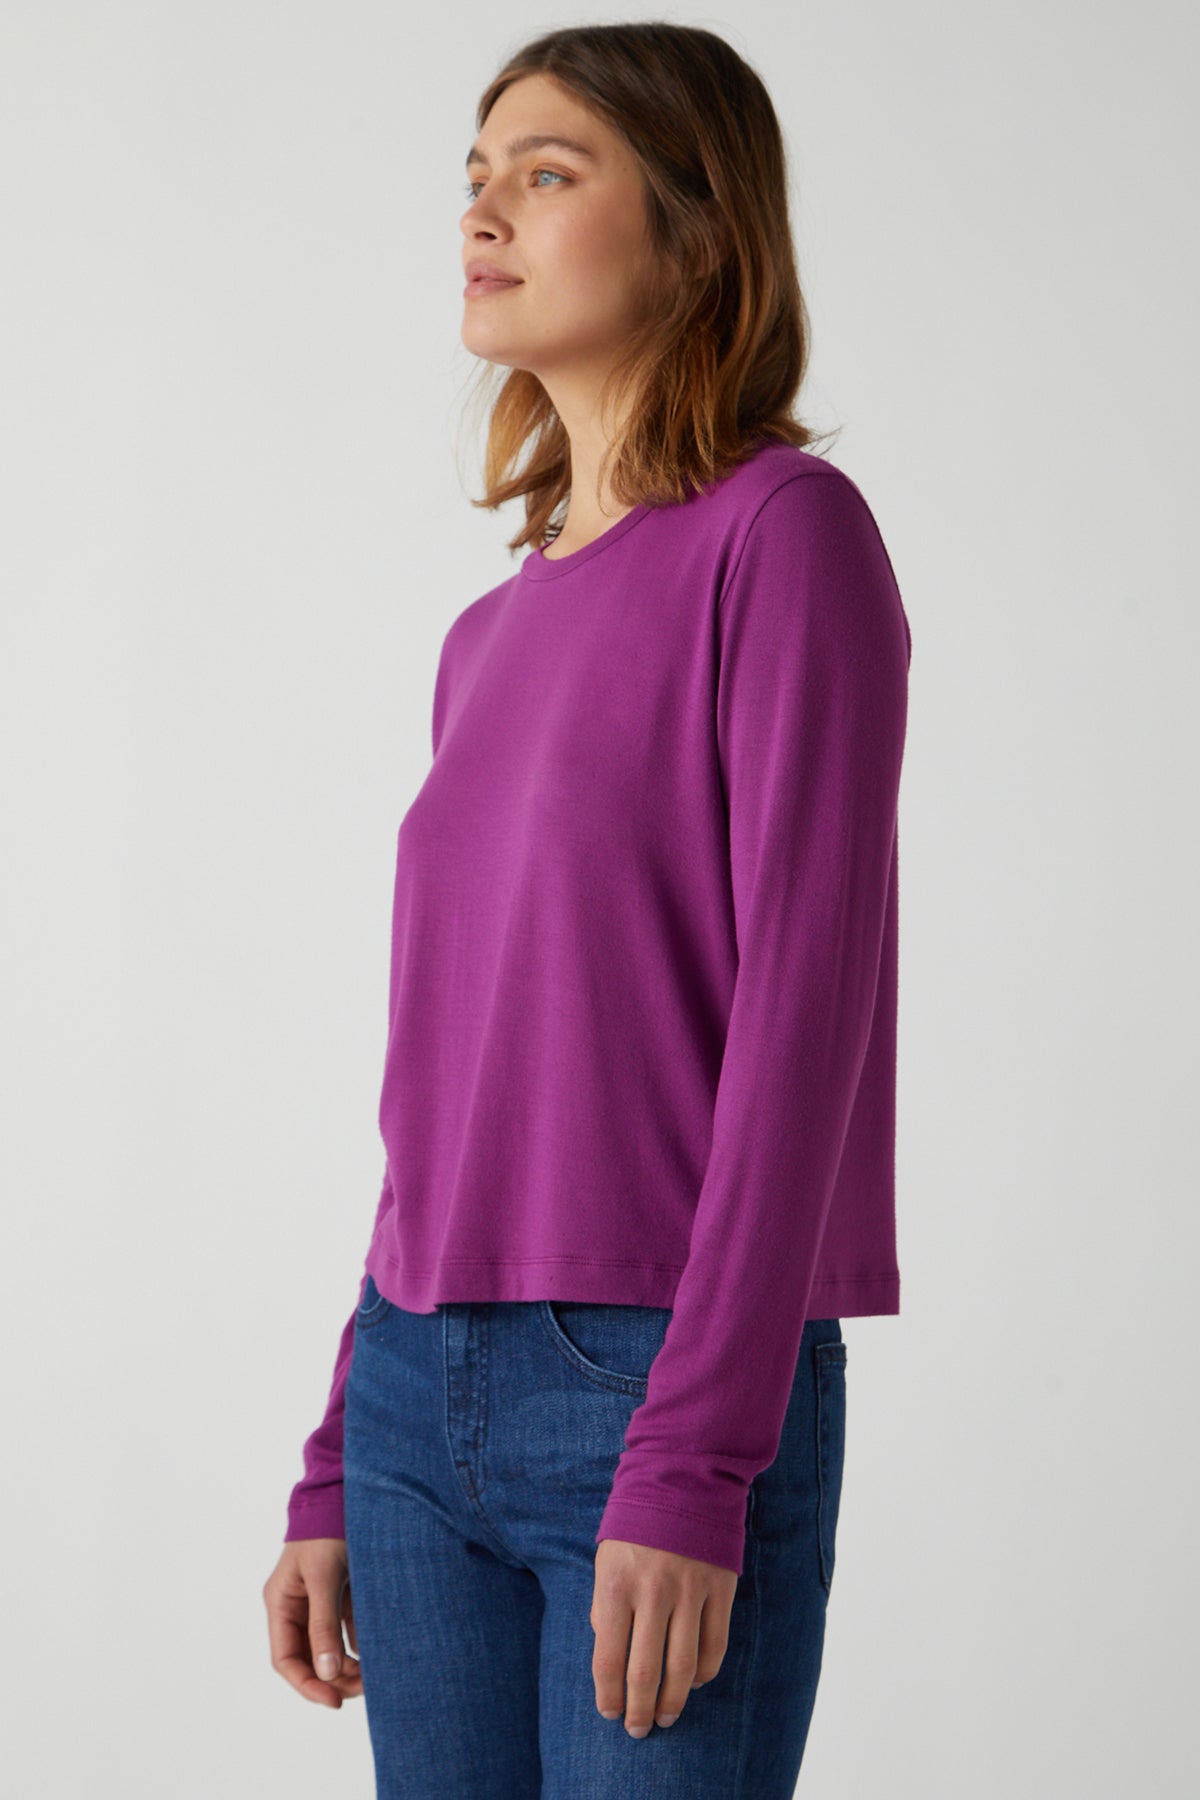 A woman wearing a Velvet by Jenny Graham rib knit, long-sleeved Pacifica Tee and stretch jeans.-26413773848769